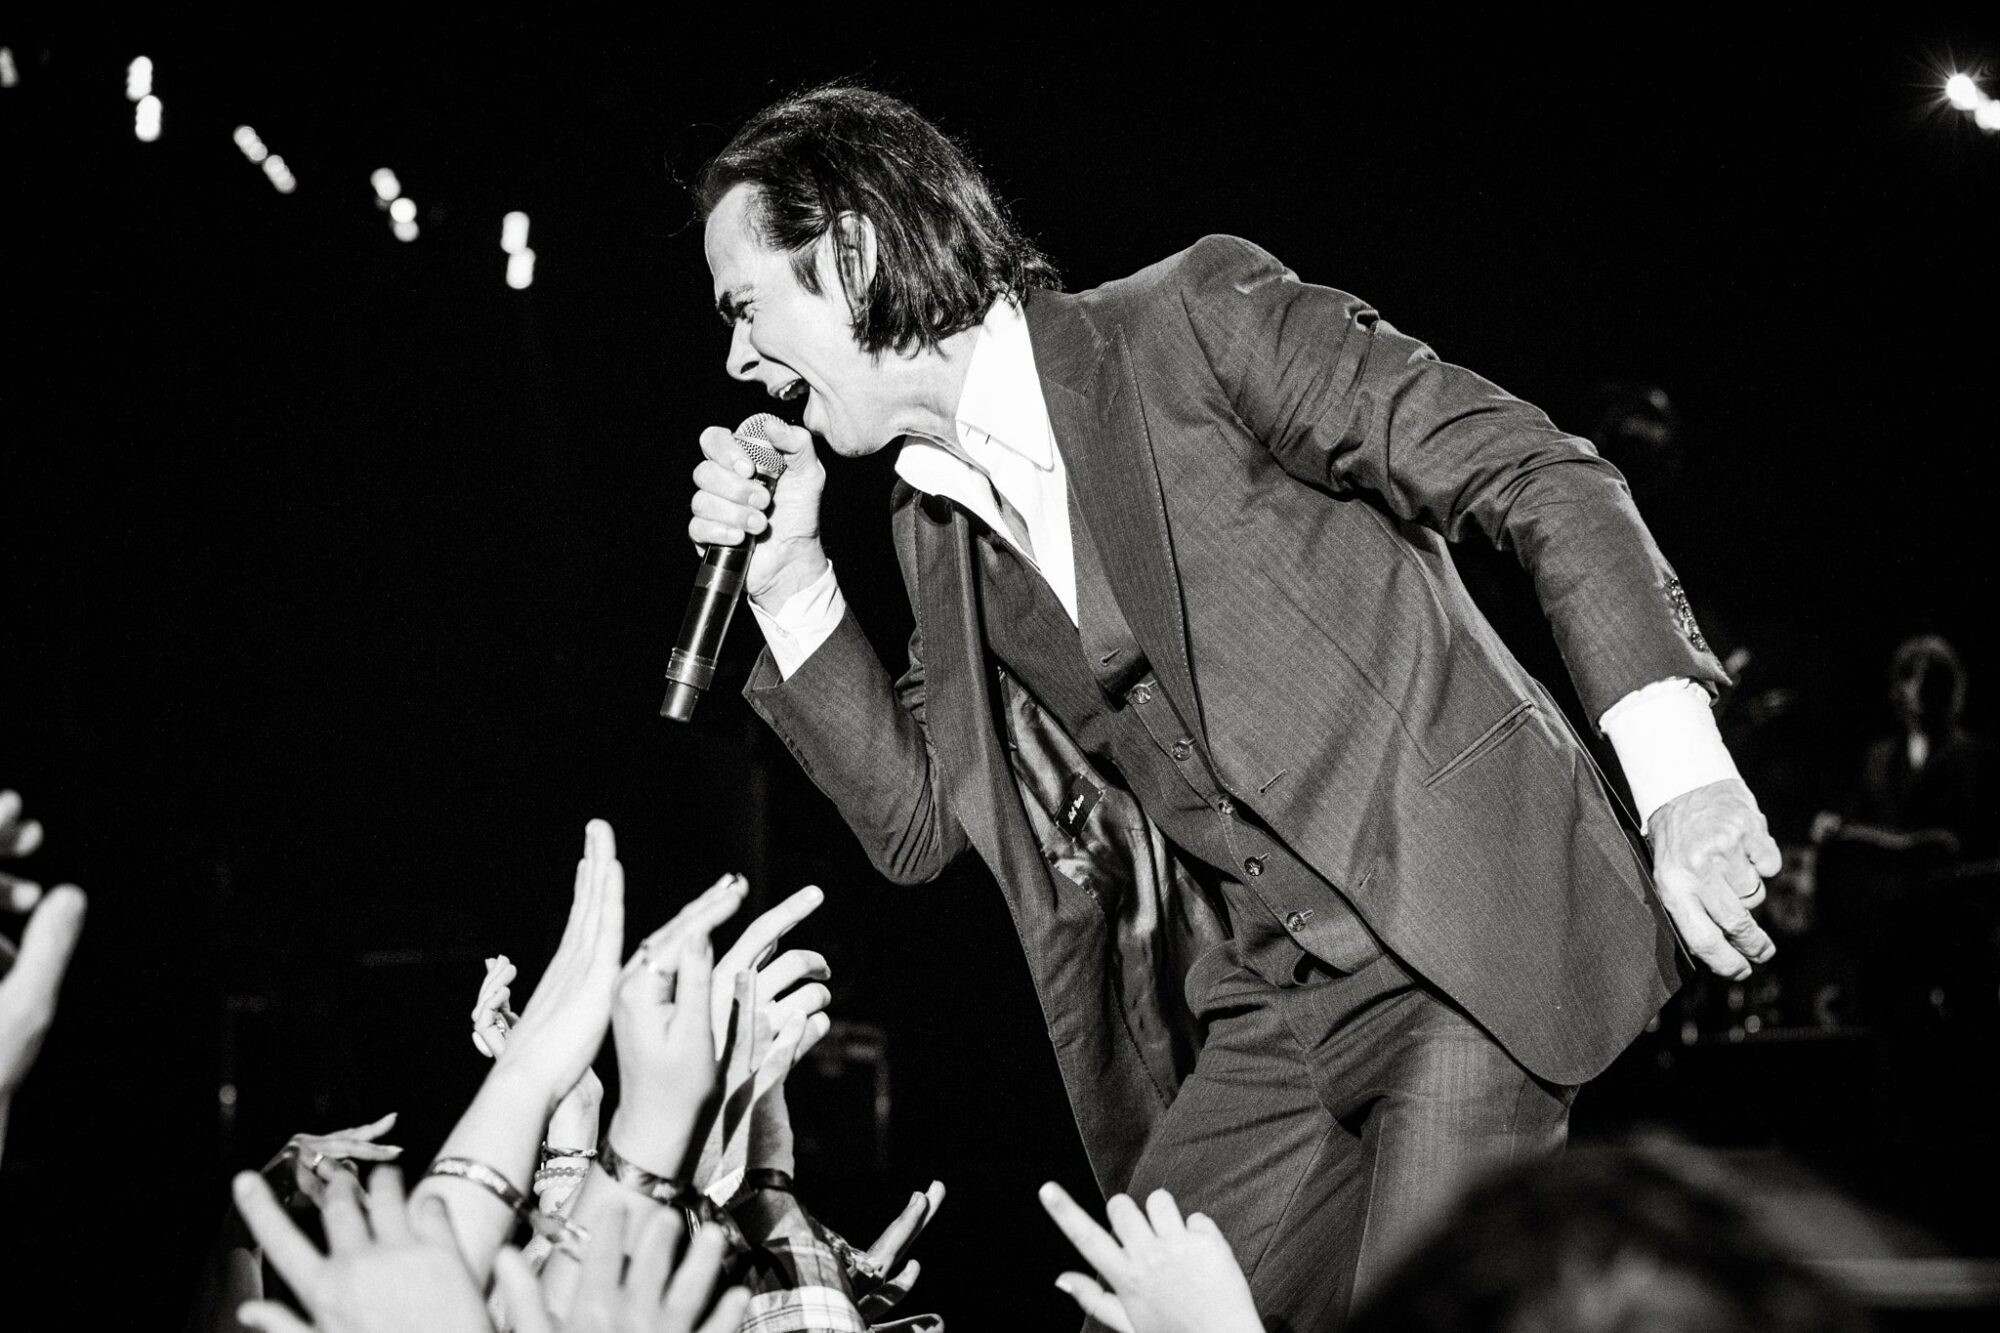 Image name Nick Cave Premium Package The Luxury Experience at First Direct Arena Leeds the 1 image from the post Nick Cave - Premium Package - The Luxury Experience at First Direct Arena, Leeds in Yorkshire.com.